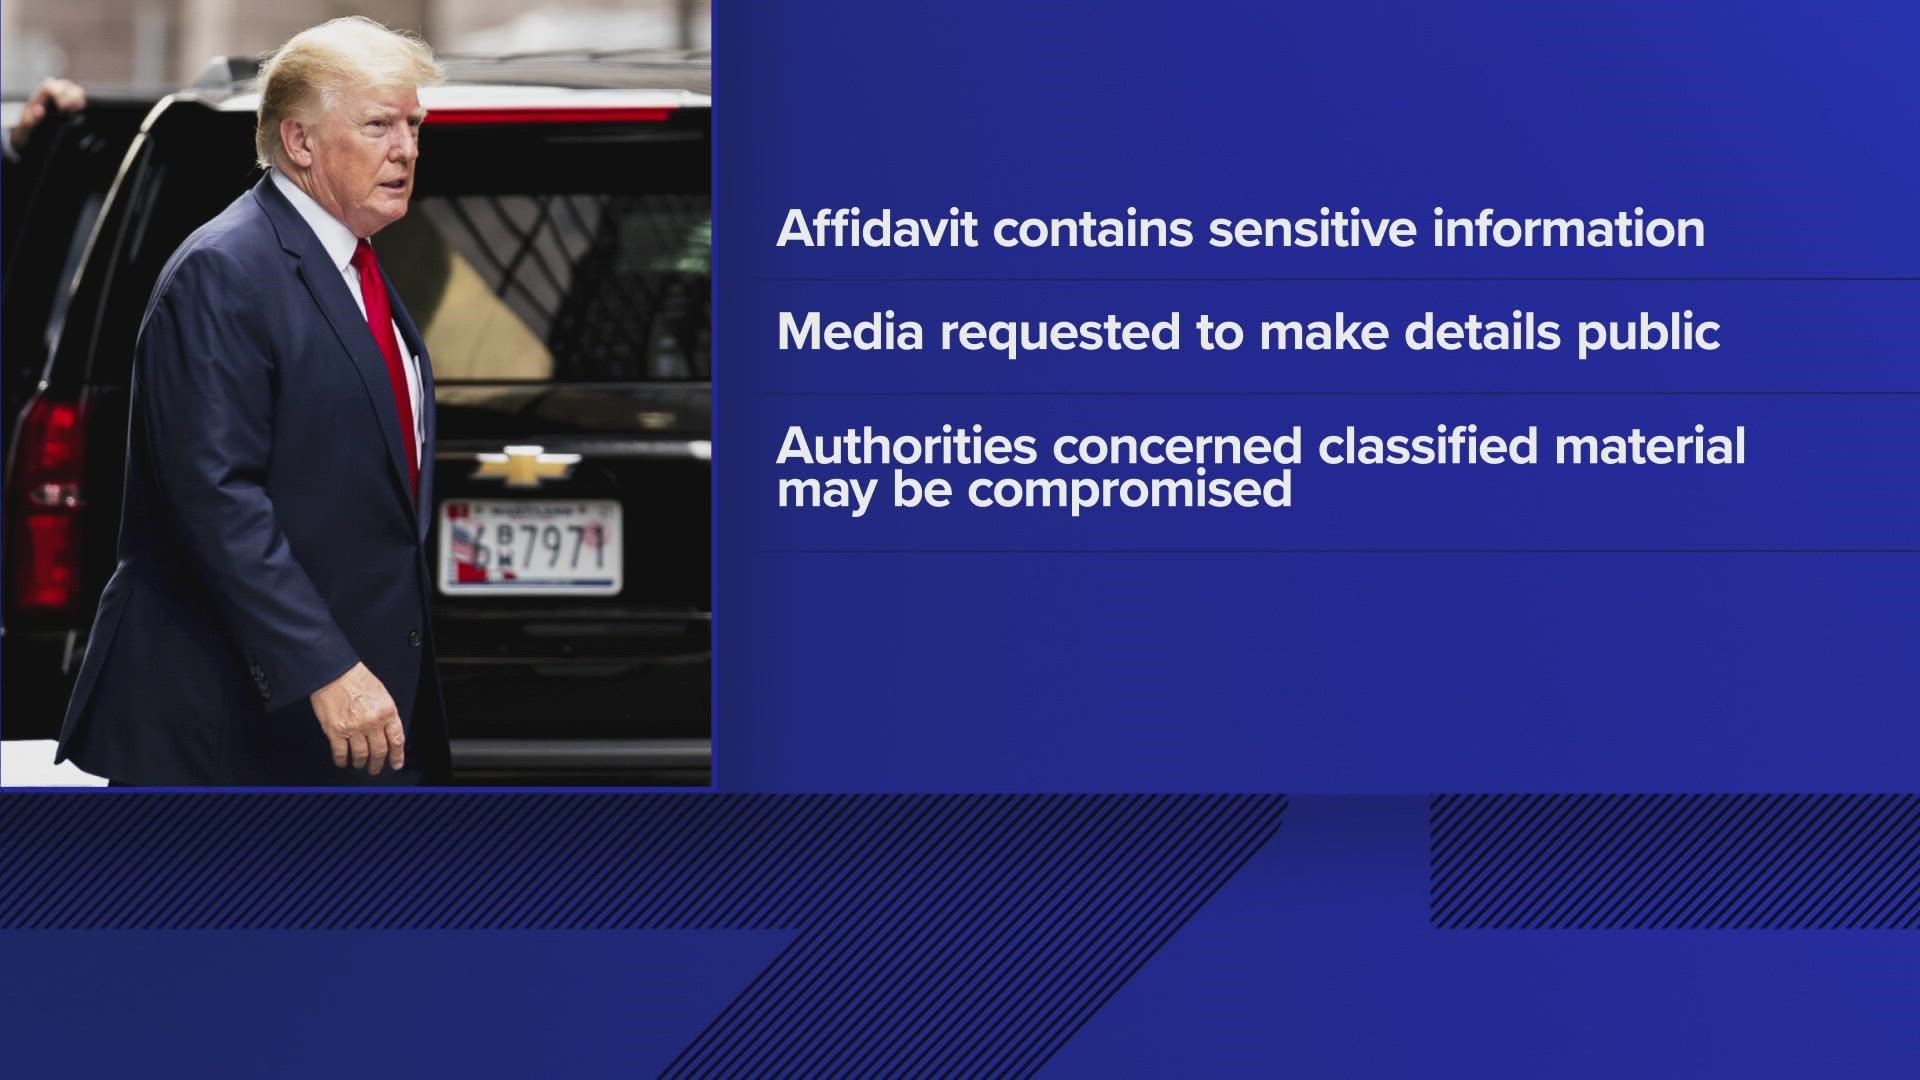 Prosecutors say the affidavit contains highly sensitive information about witnesses.